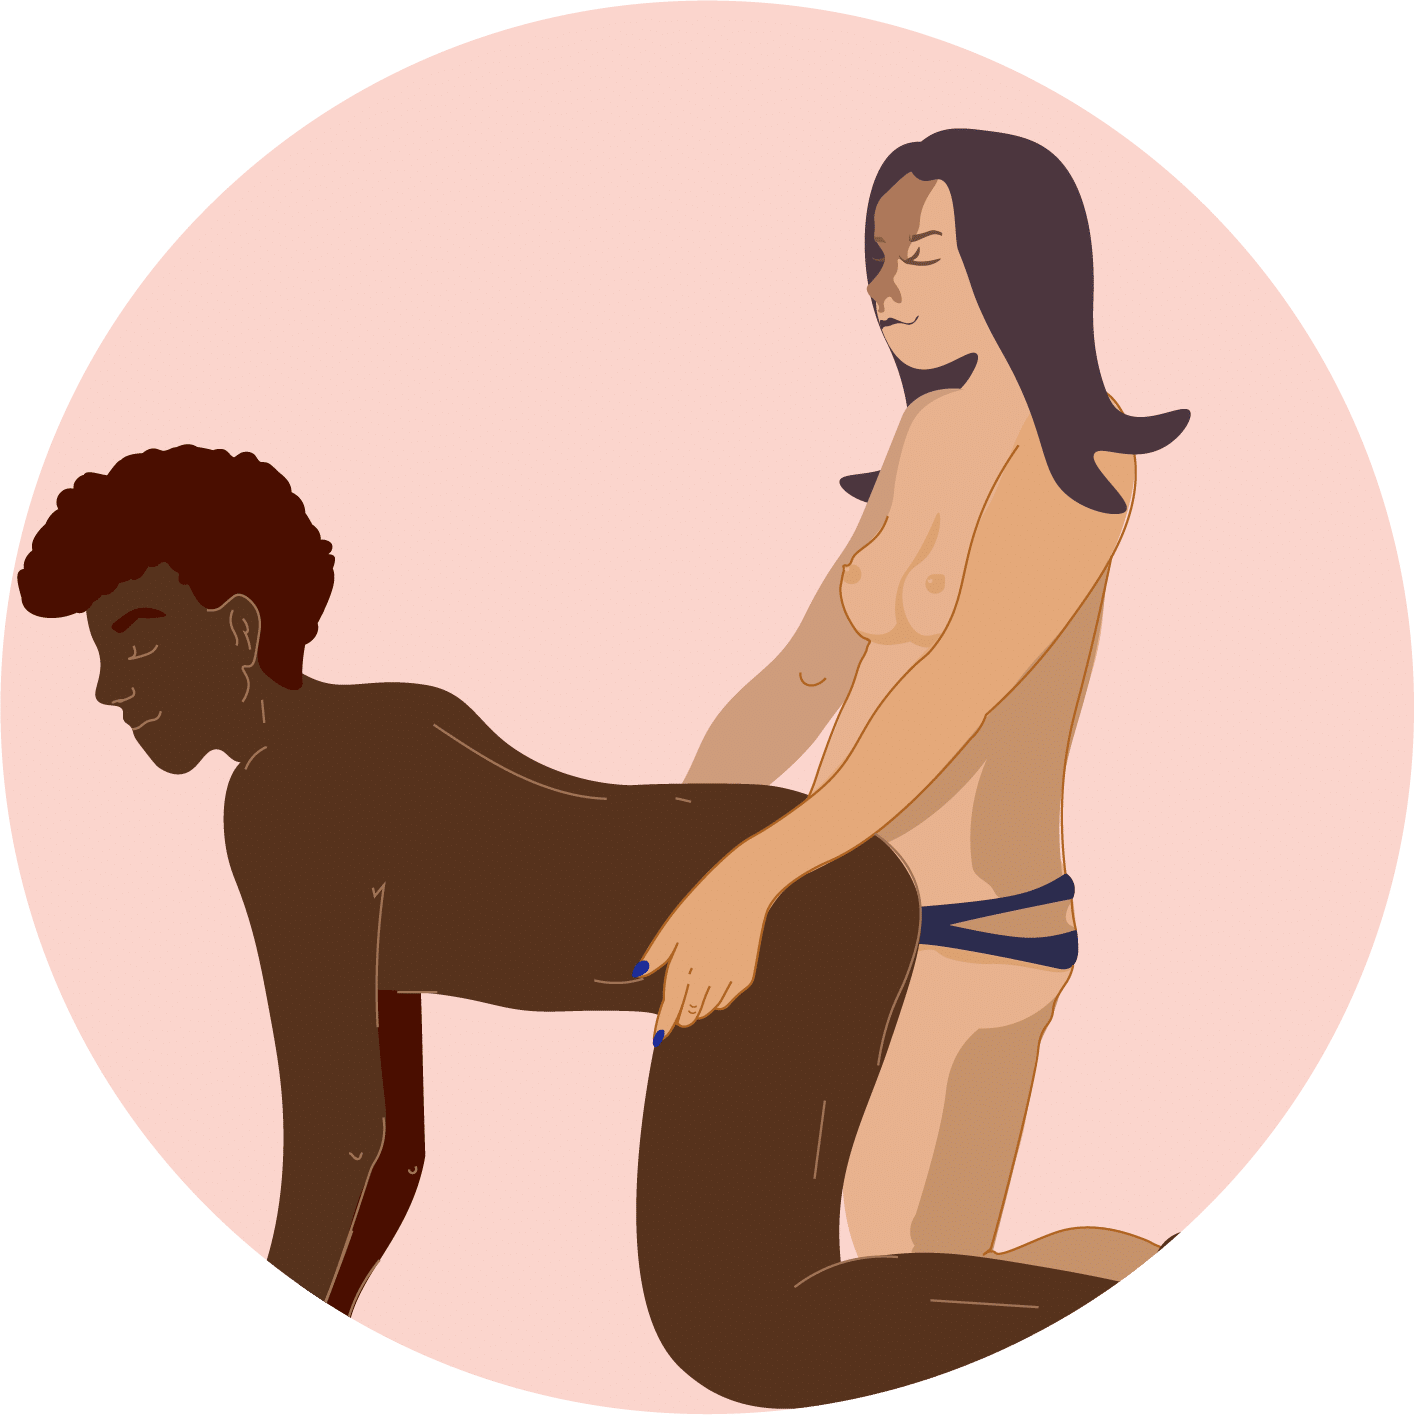 illustration of a couple using a strap-on dildo